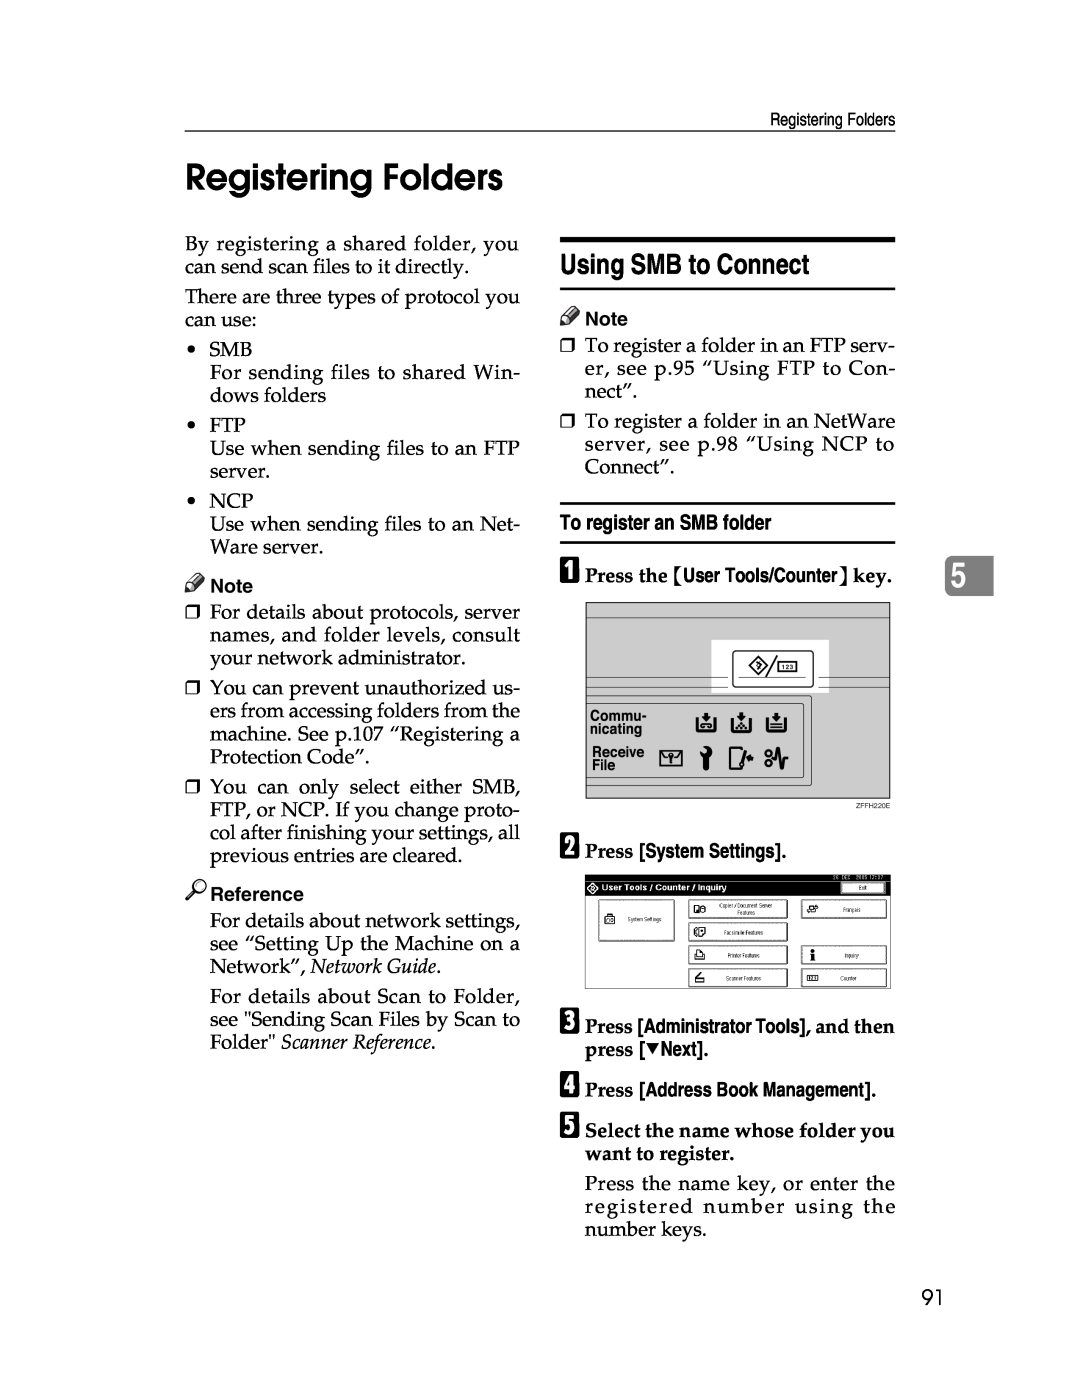 Lanier LD230 Registering Folders, Using SMB to Connect, To register an SMB folder, Reference, B Press System Settings 